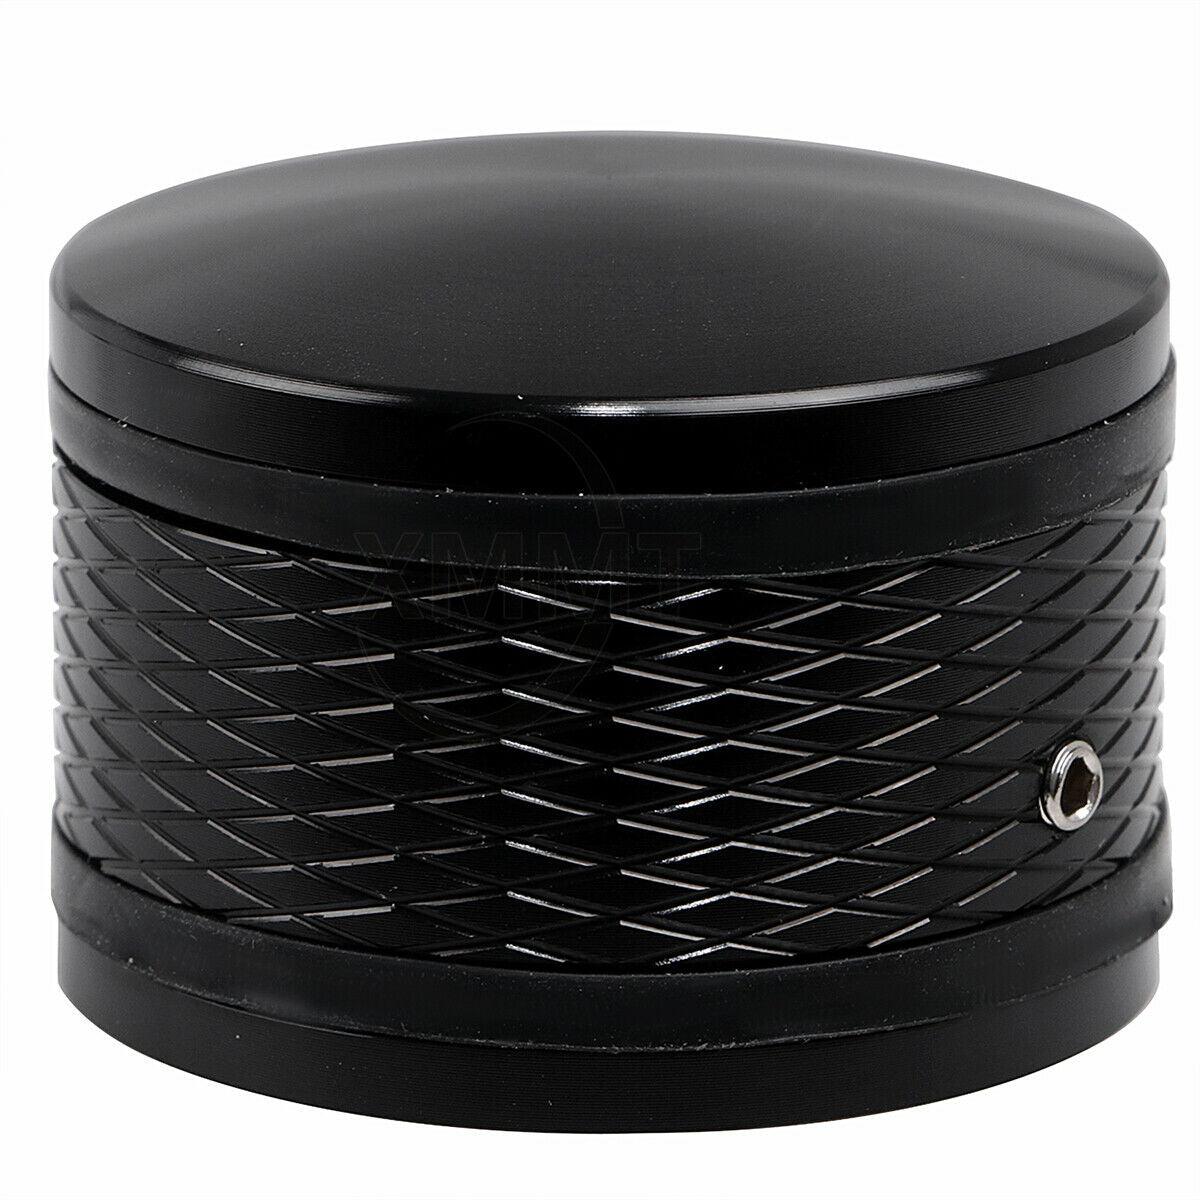 Black Front Axle Cap Nut Cover For Harley Softail Dyna Touring Road King Glide - Moto Life Products